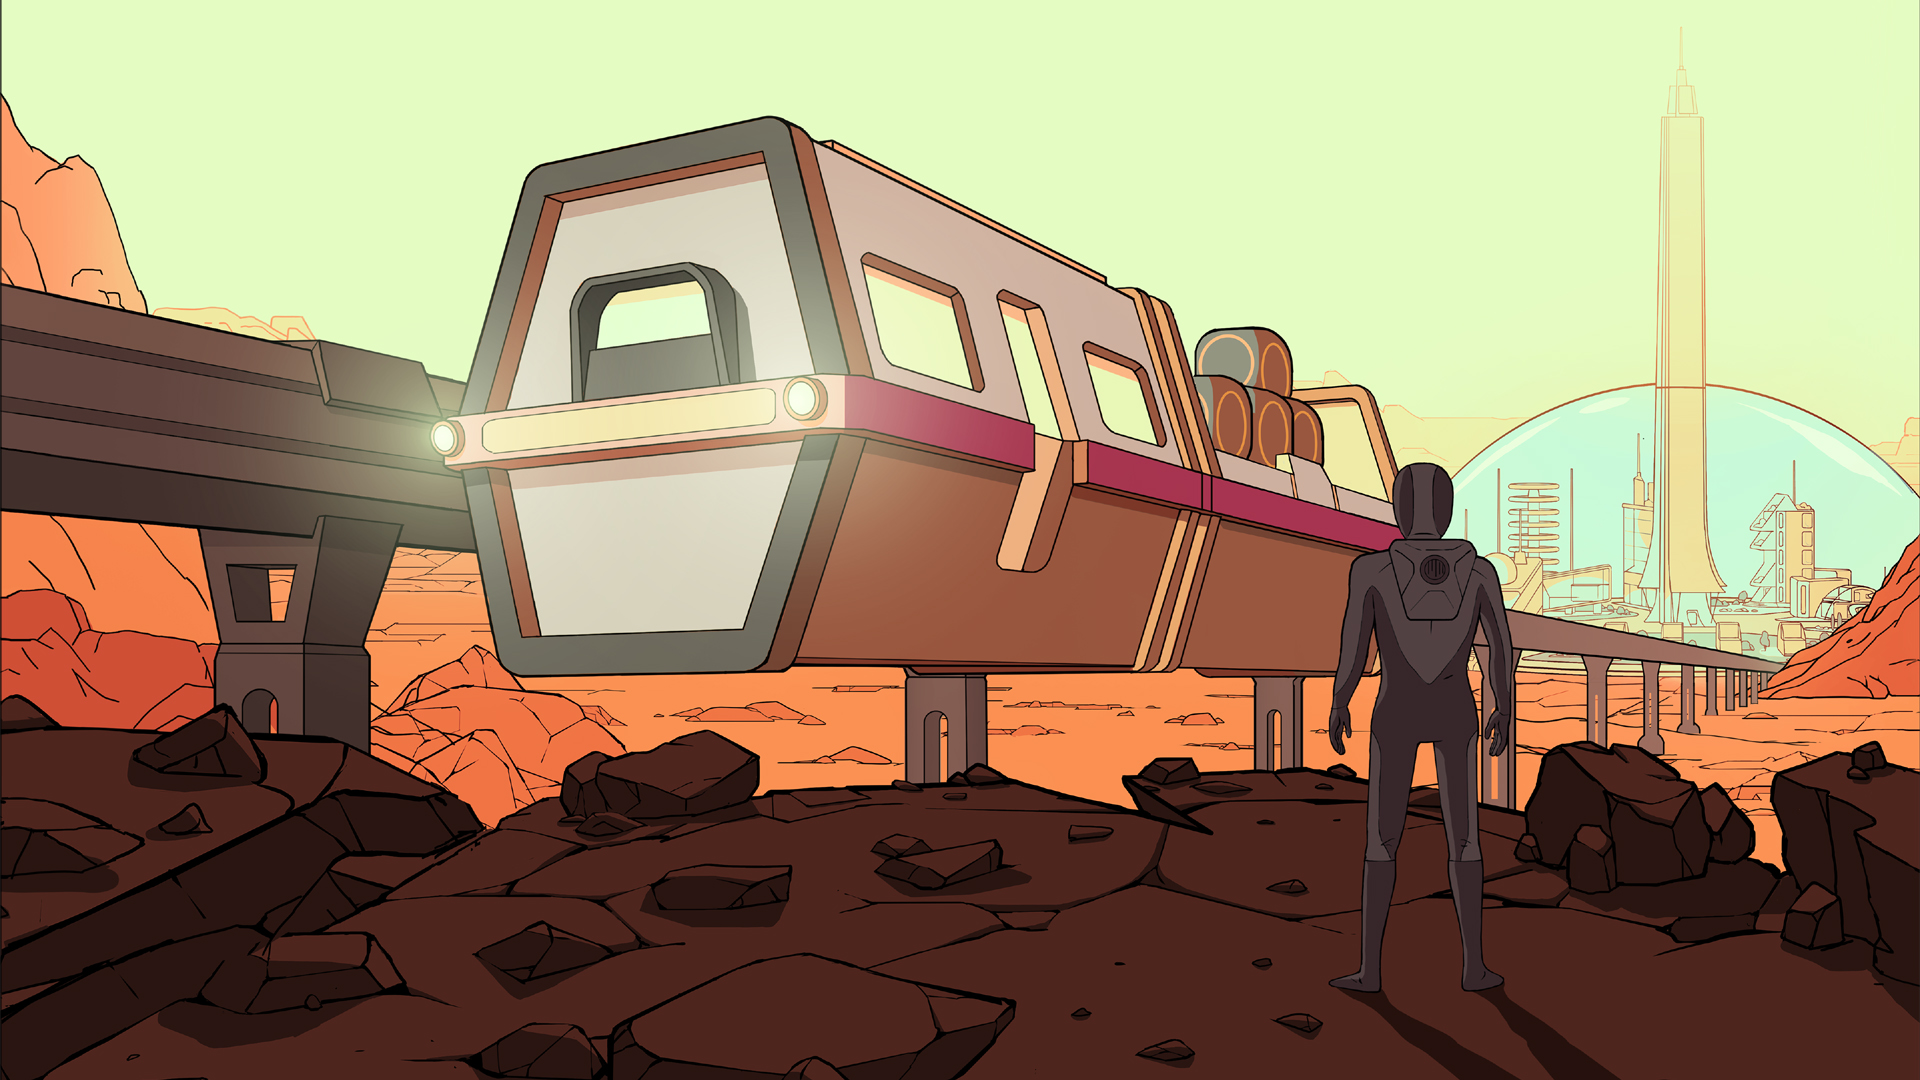 City builder Surviving Mars is a space train game now